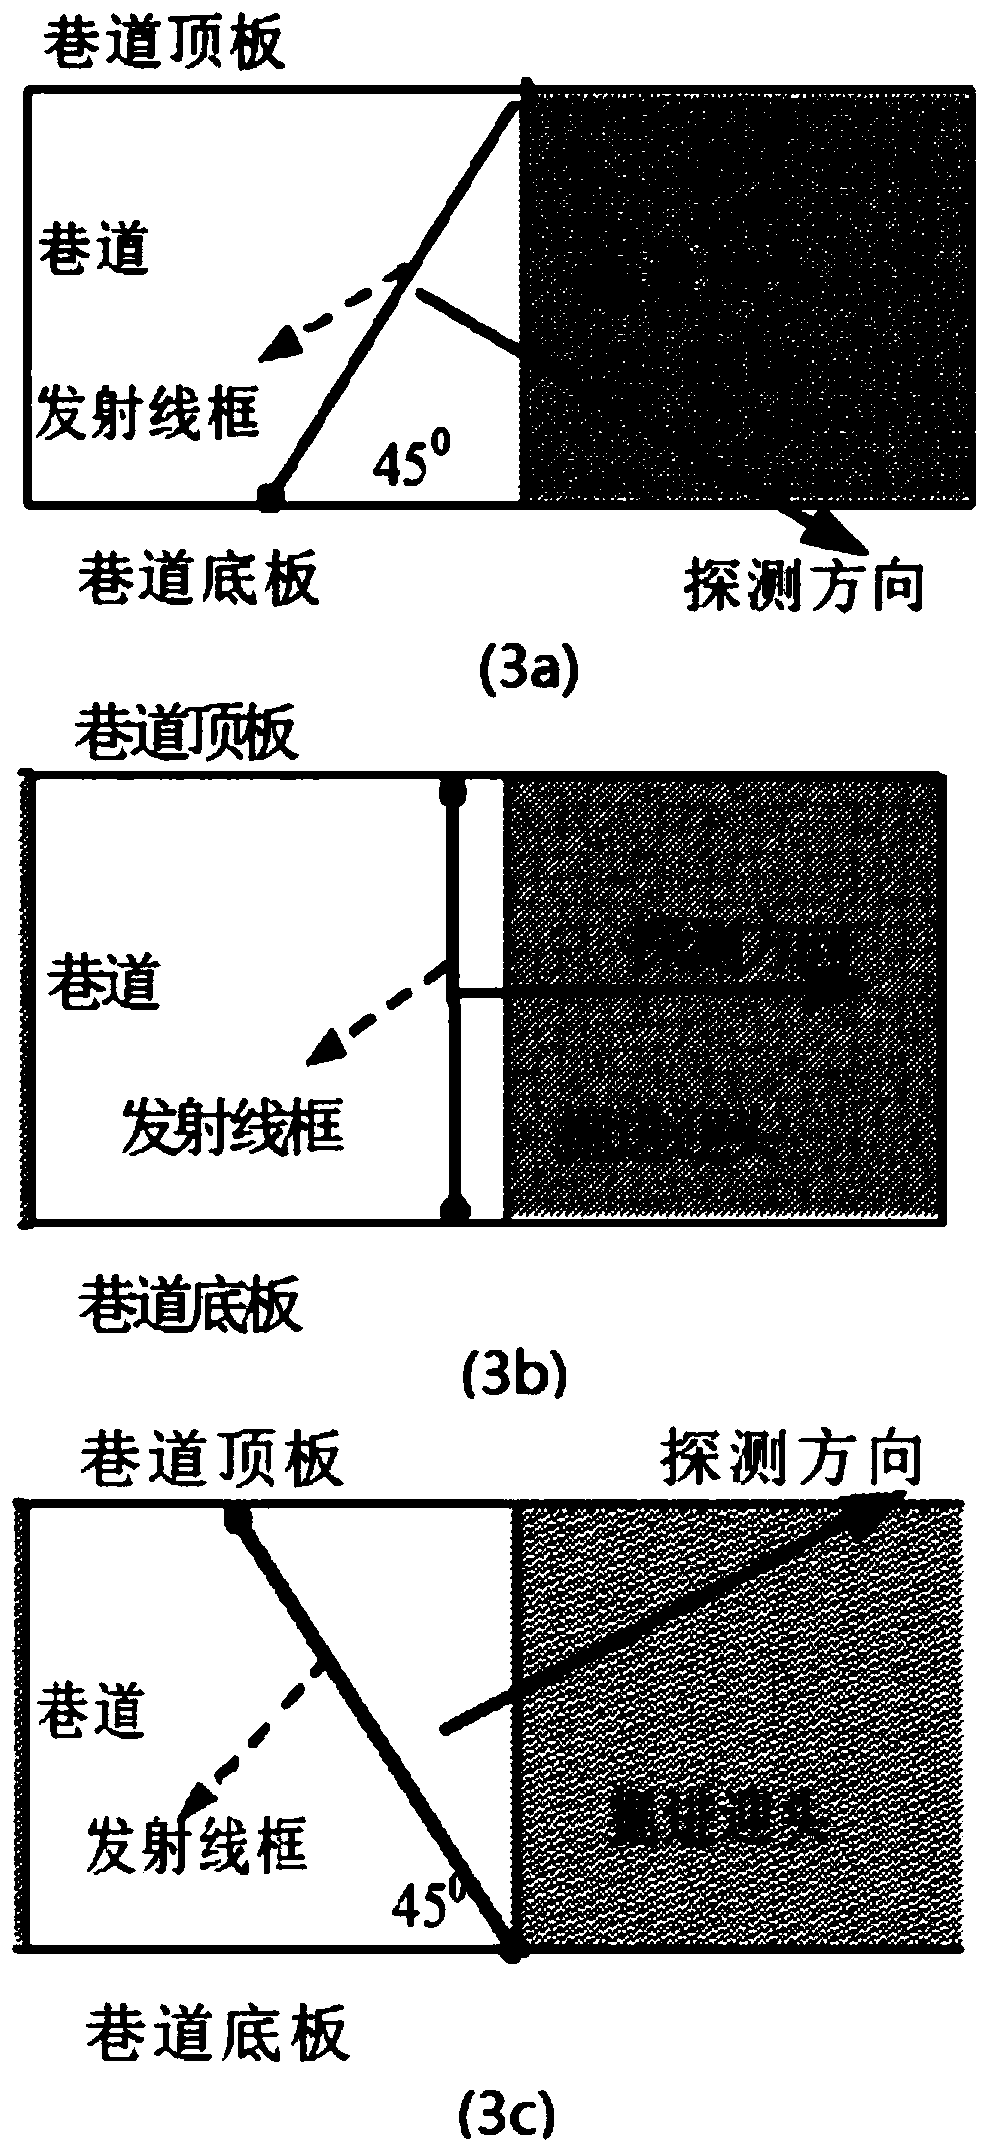 Mine transient electromagnetic ground and underground stereo double magnetic source detection method